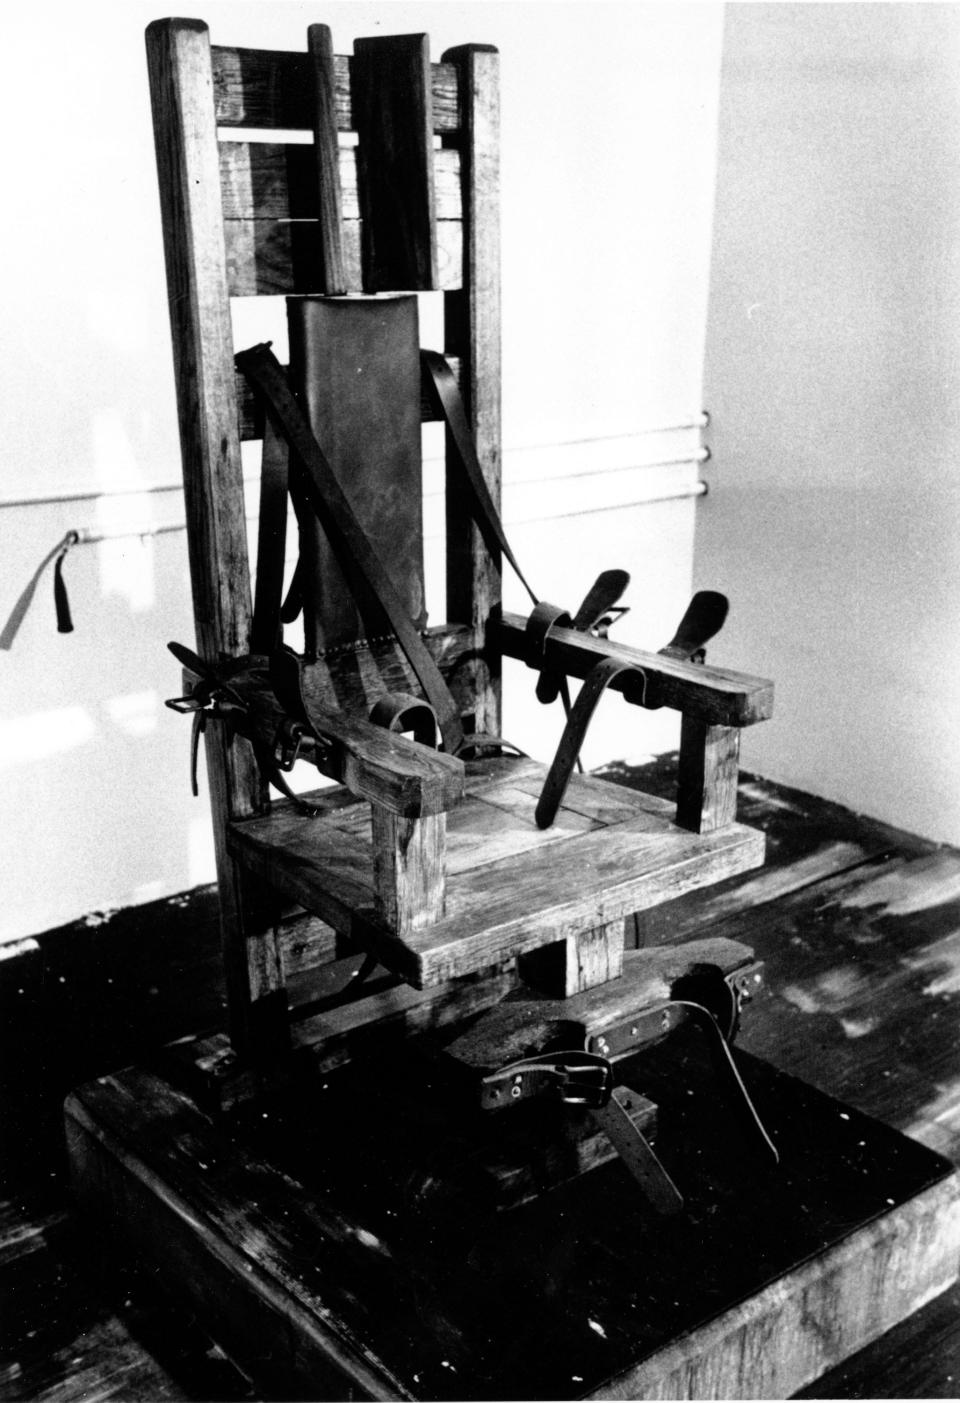 This is an undated file photo of the electric chair at the Tennessee State prison in Nashville. First used by New York State in 1890, it was used throughout the 20th century to execute hundreds. Since 1976, over 150 inmates have been executed by electrocution. It was considered humane on its introduction but resulted in many horrific executions over the years. (AP Photo, File) ORG XMIT: NY110